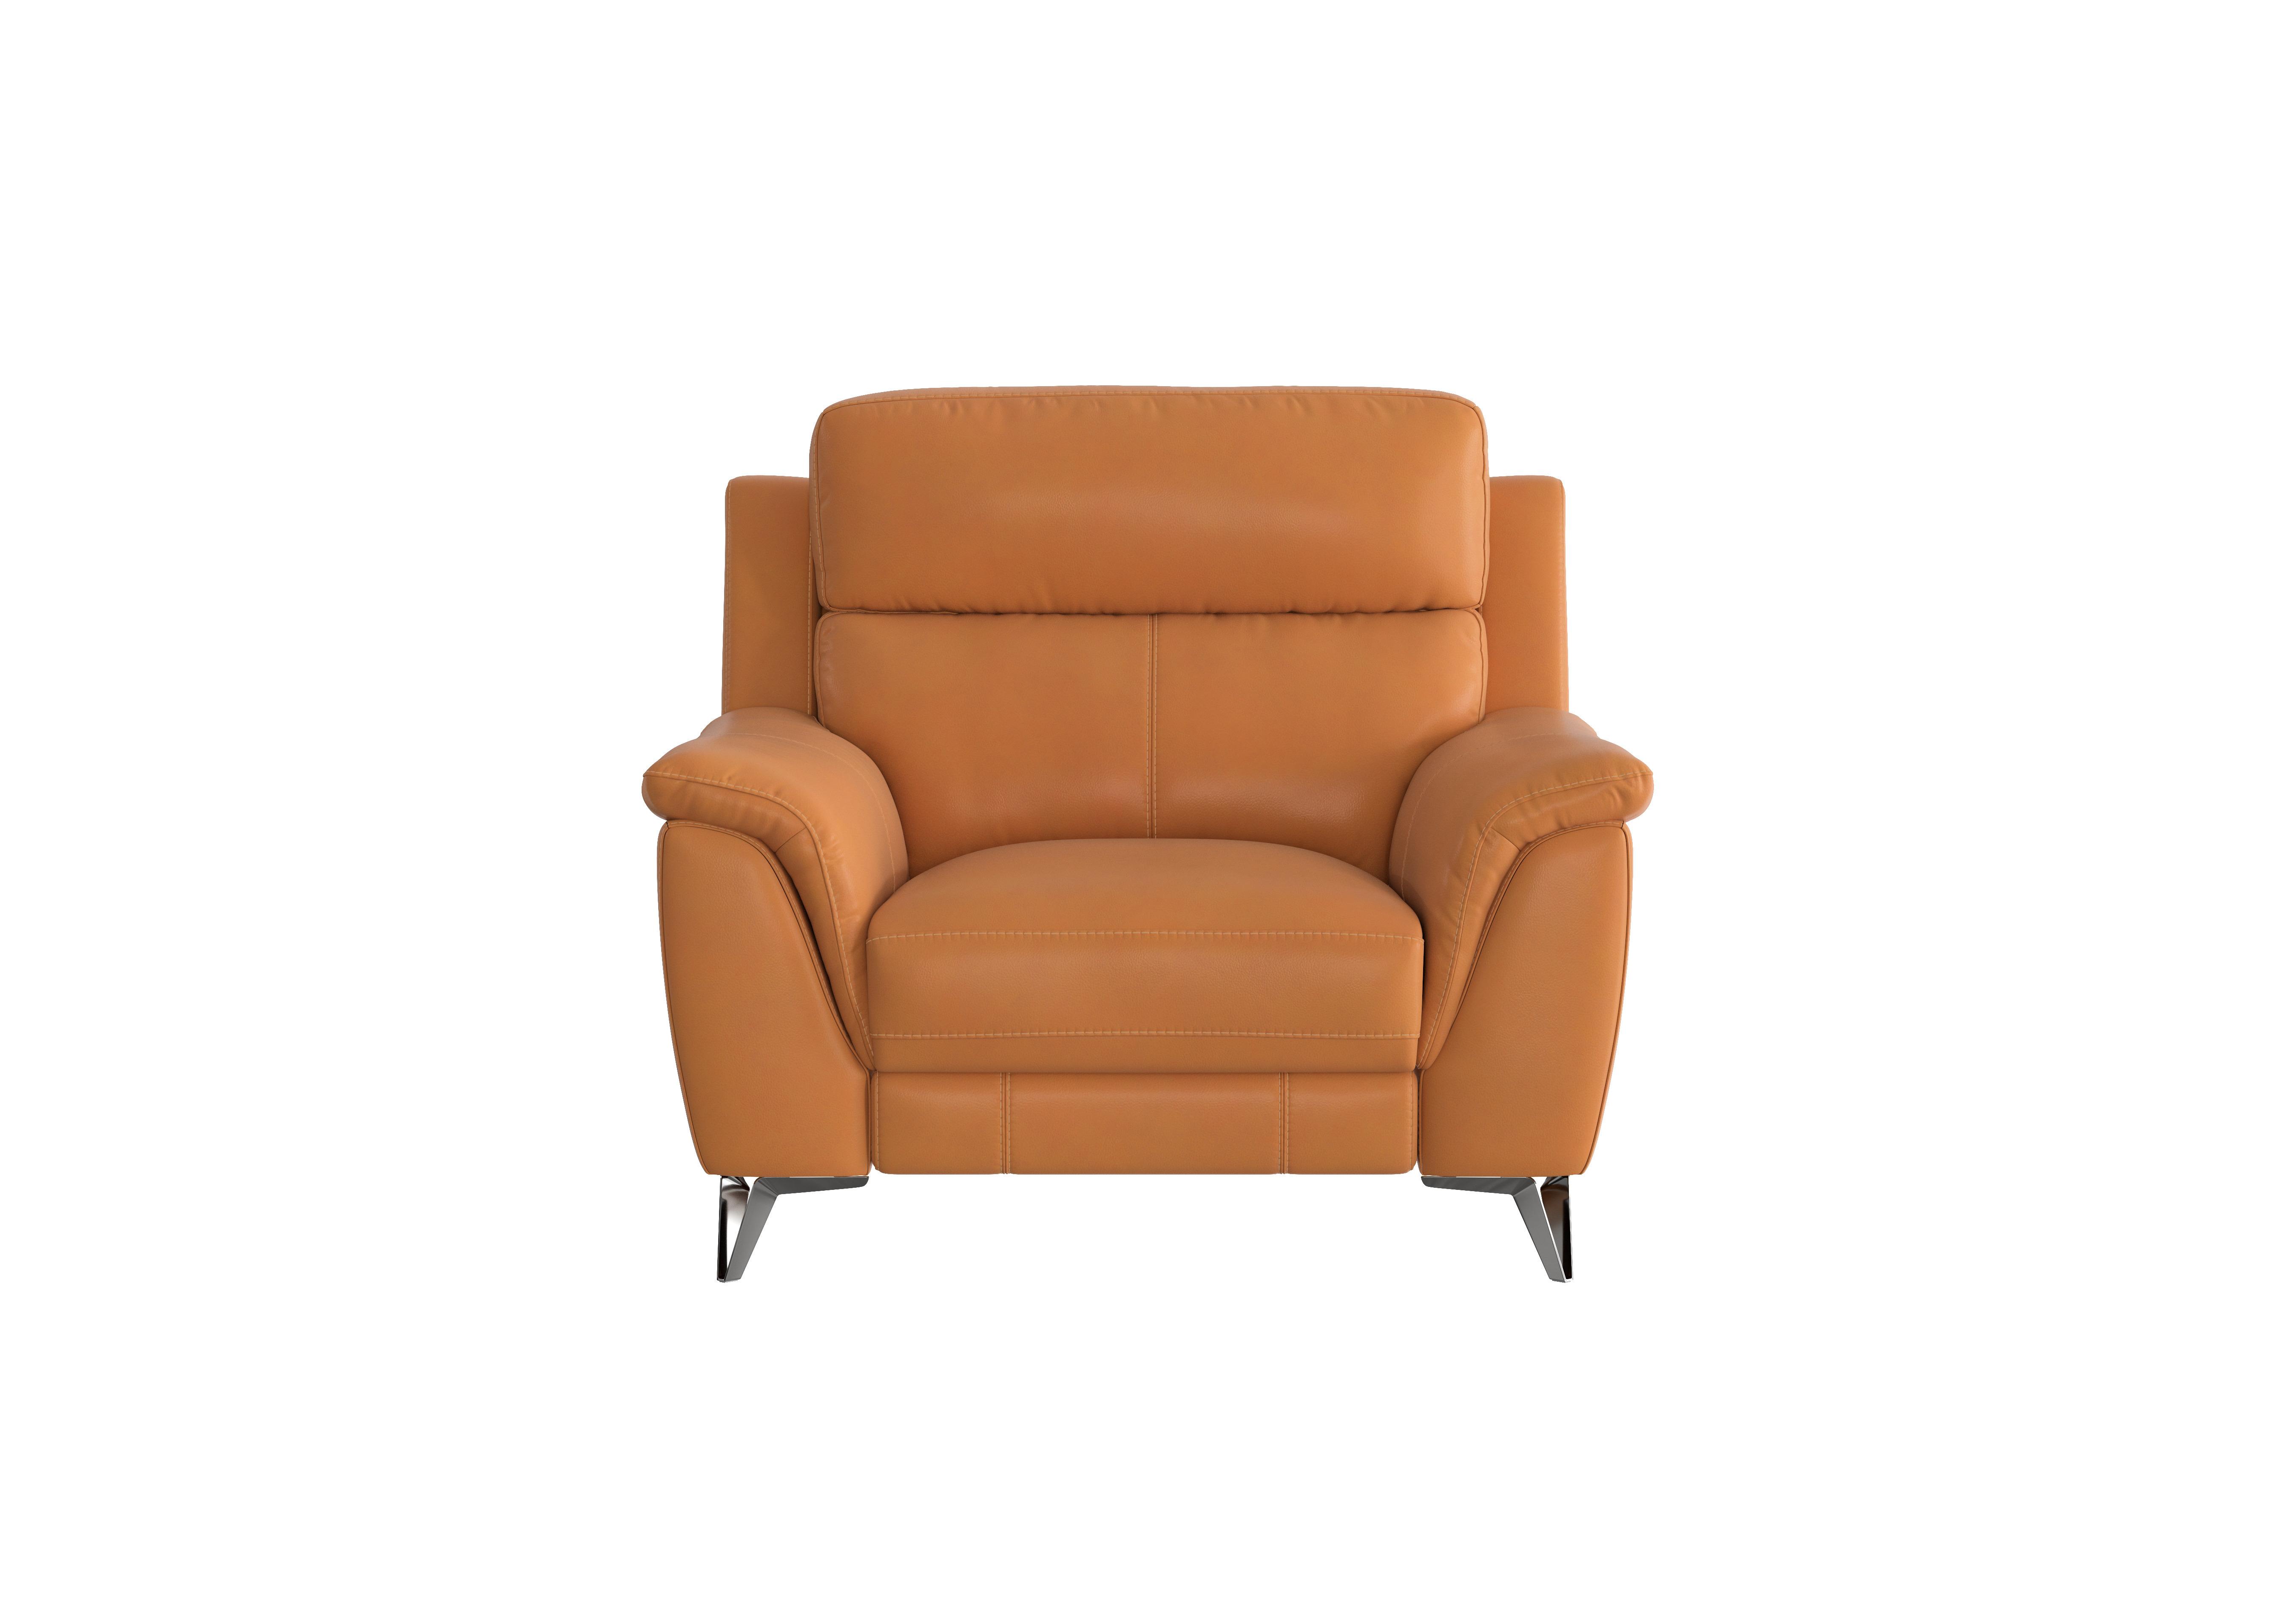 Contempo Leather Armchair in Bv-335e Honey Yellow on Furniture Village